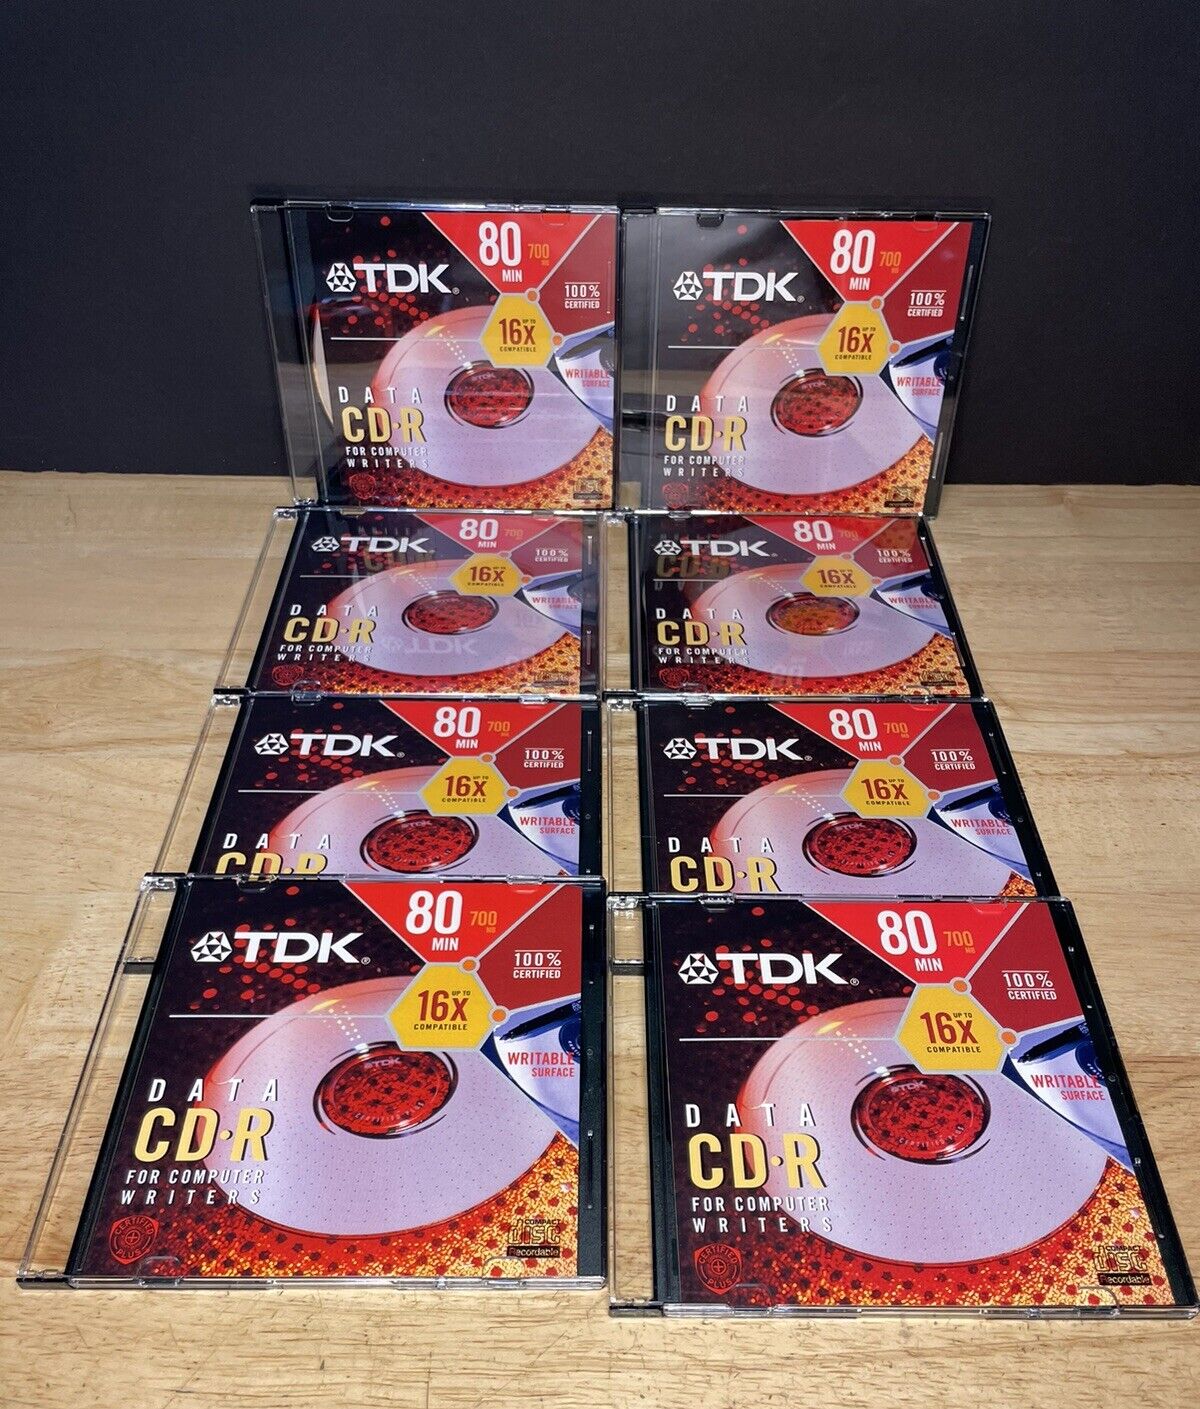 TDK Data CD-R For Computers Writers 80 MIN 700MB Bundle Of 8